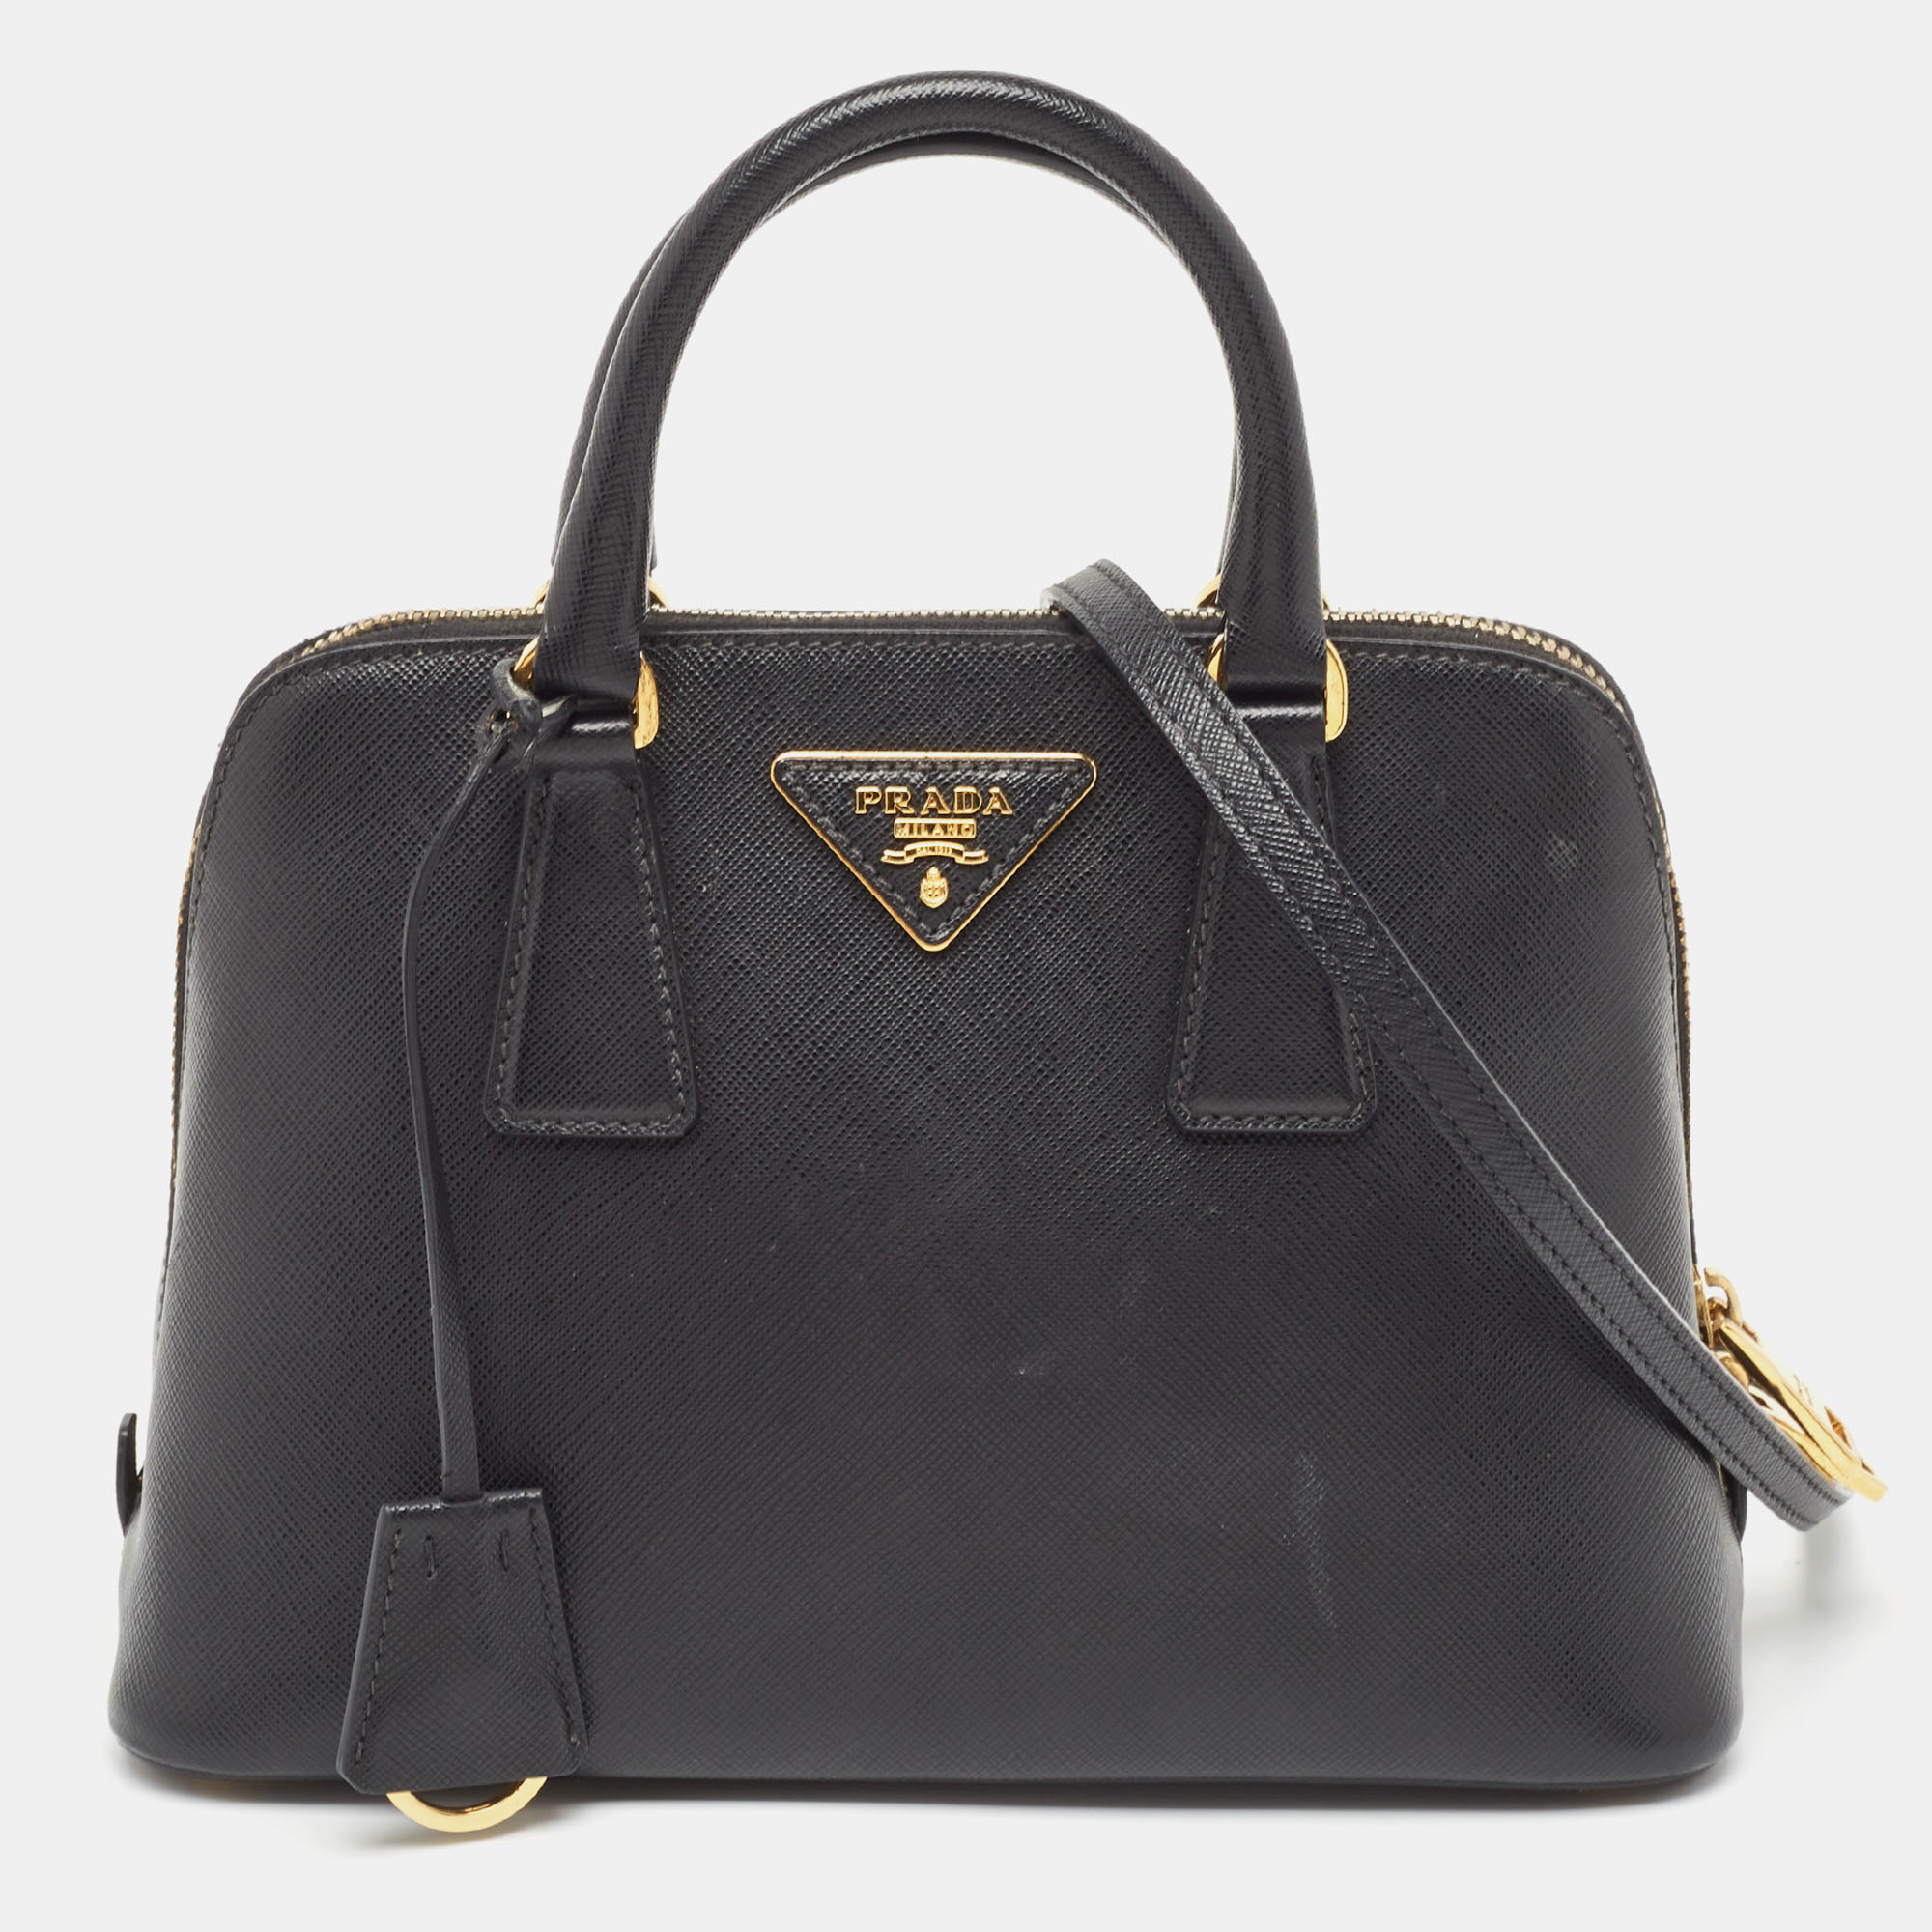 The simple silhouette and the use of durable materials for the exterior bring out the appeal of this Prada satchel for women. It features comfortable handles and a well lined interior.